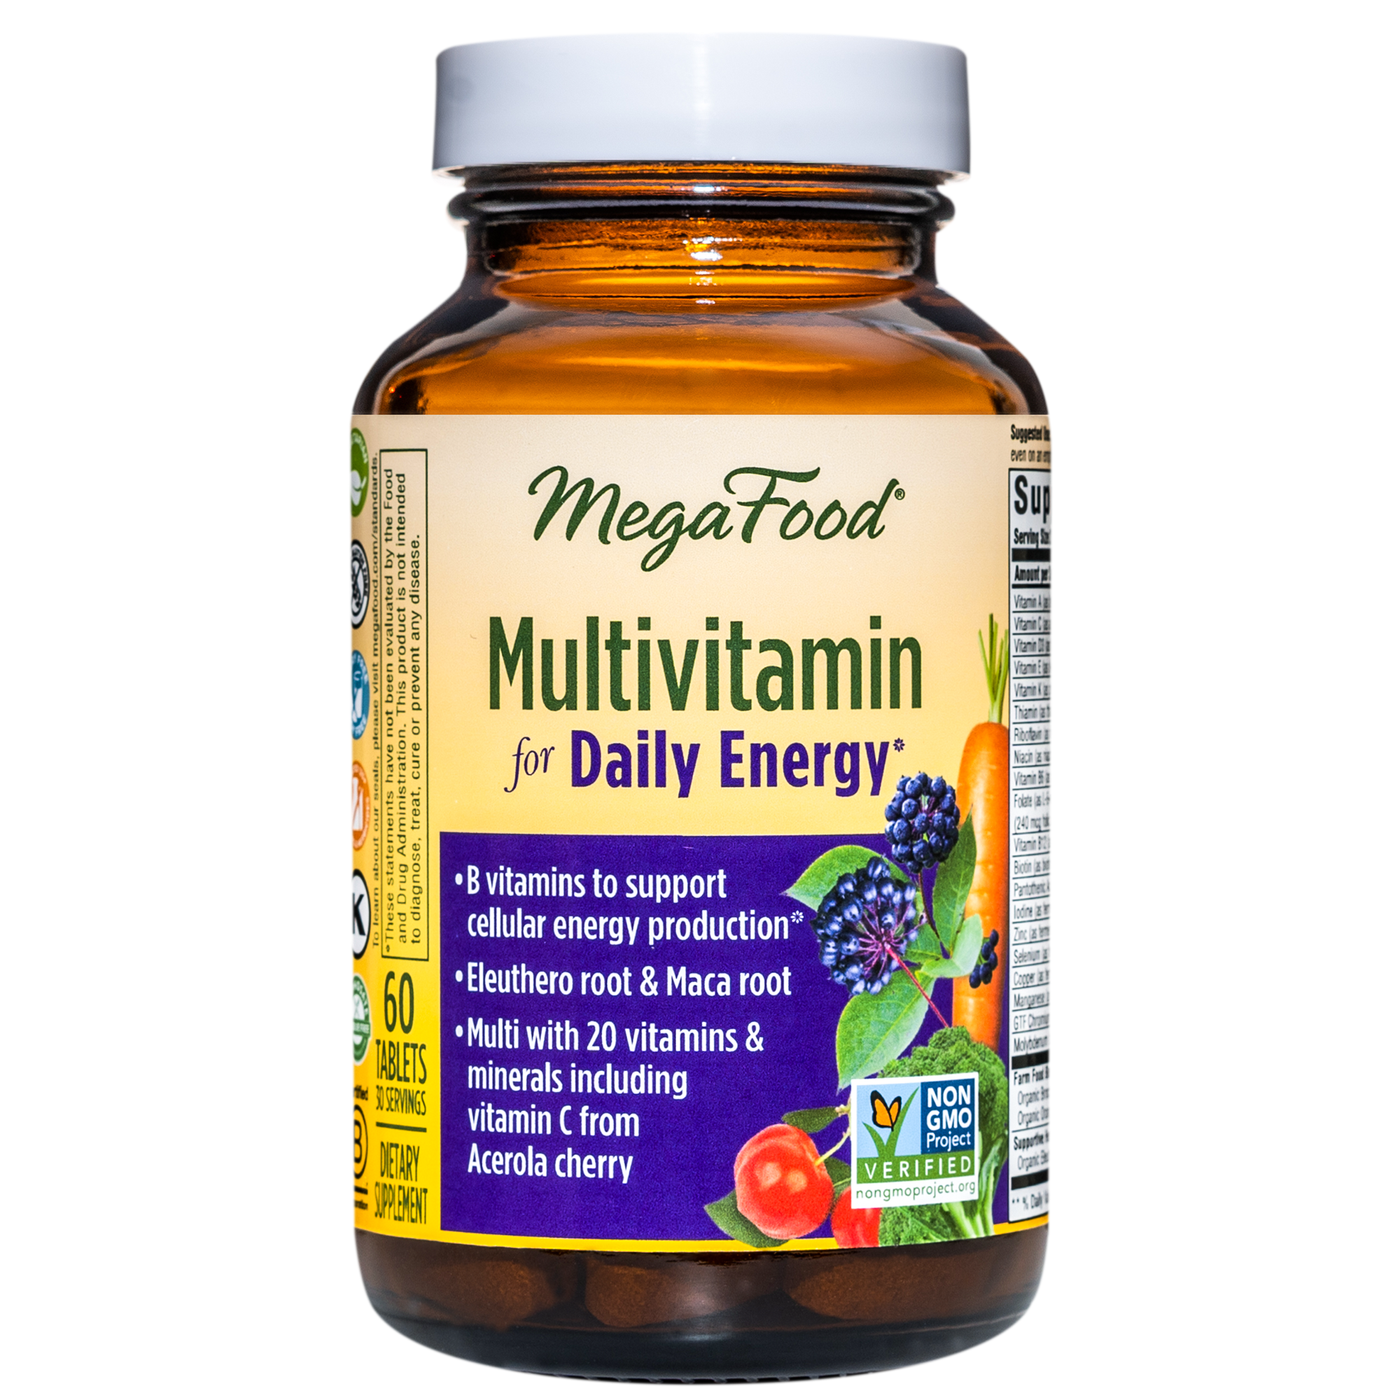 Multivitamin for Daily Energy*  Curated Wellness